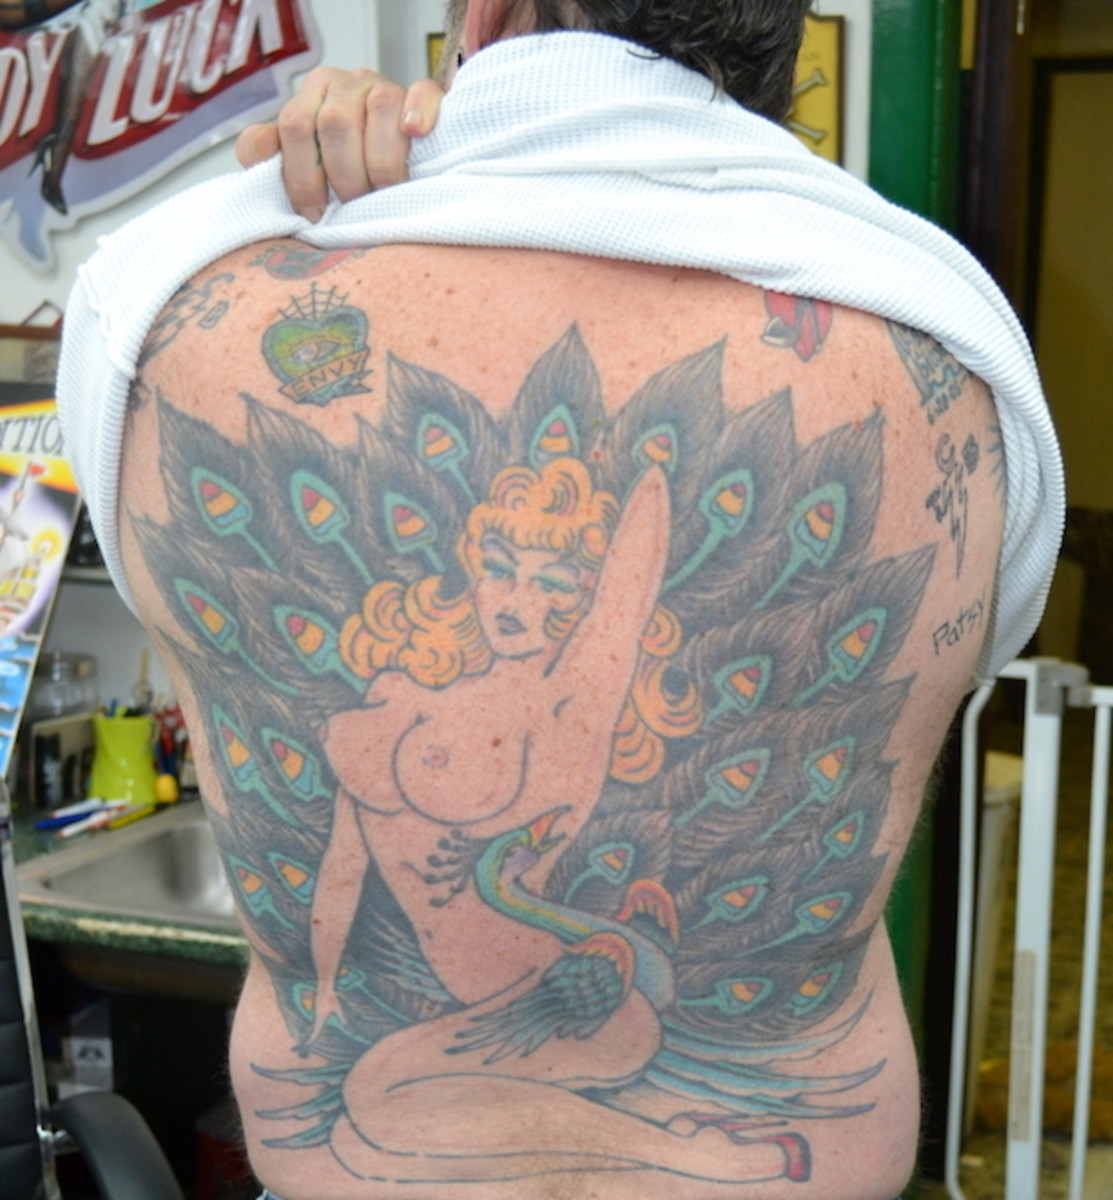 Sailor Eddie's back piece was inked by Dave Gibson at Bill Loika's shop in Deep River, Connecticut, back in the 1980s. After almost 30 years, the tattoo is still clearly visible at a distance.